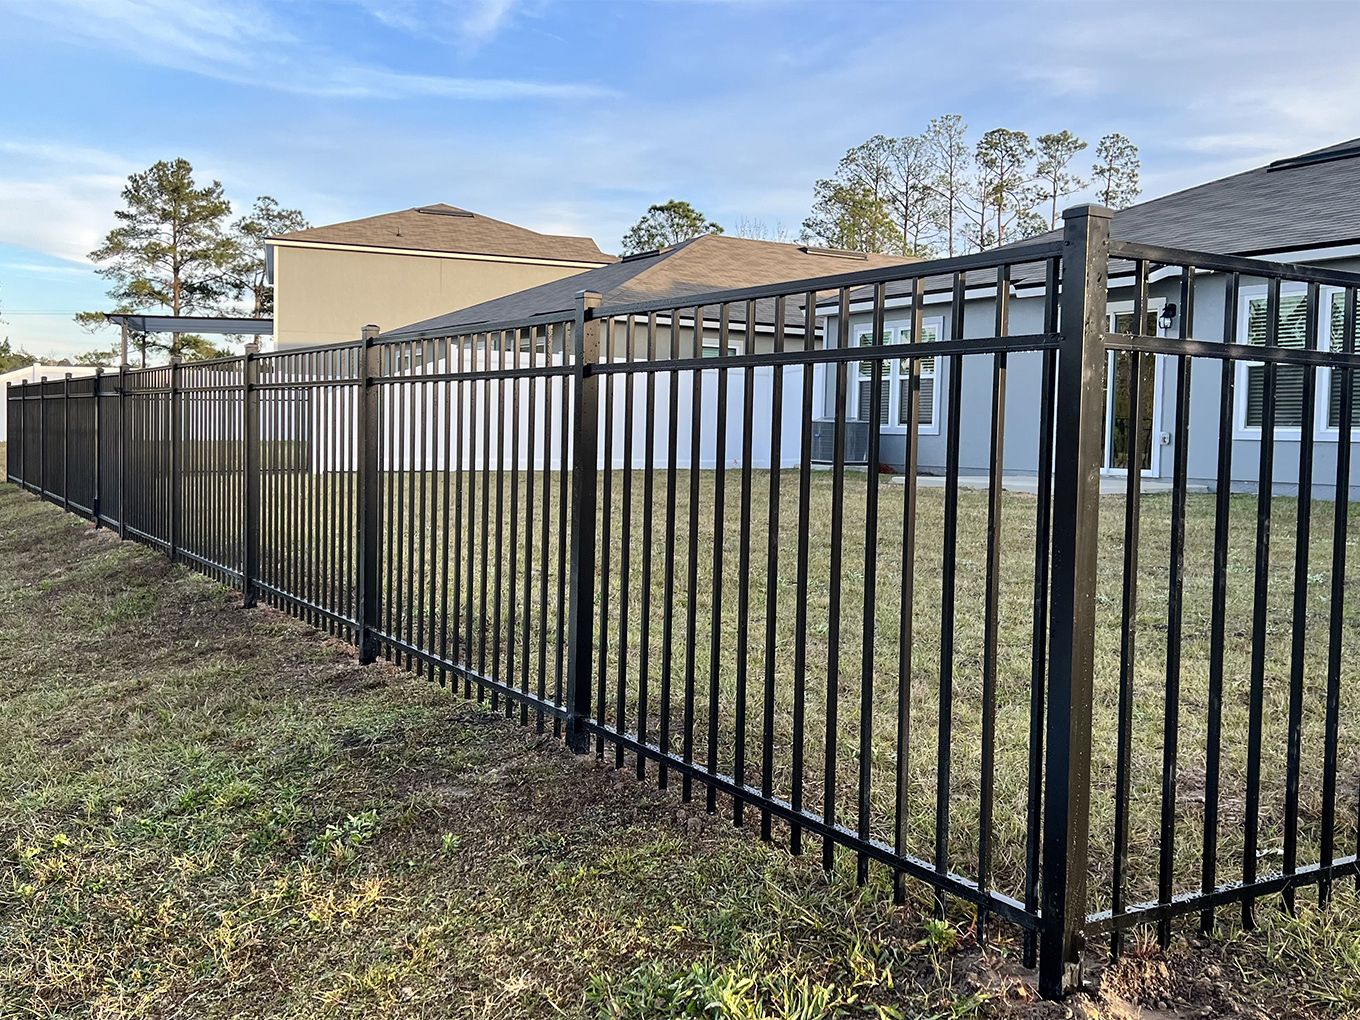 Aluminum fence in black at a residential yard in Florida